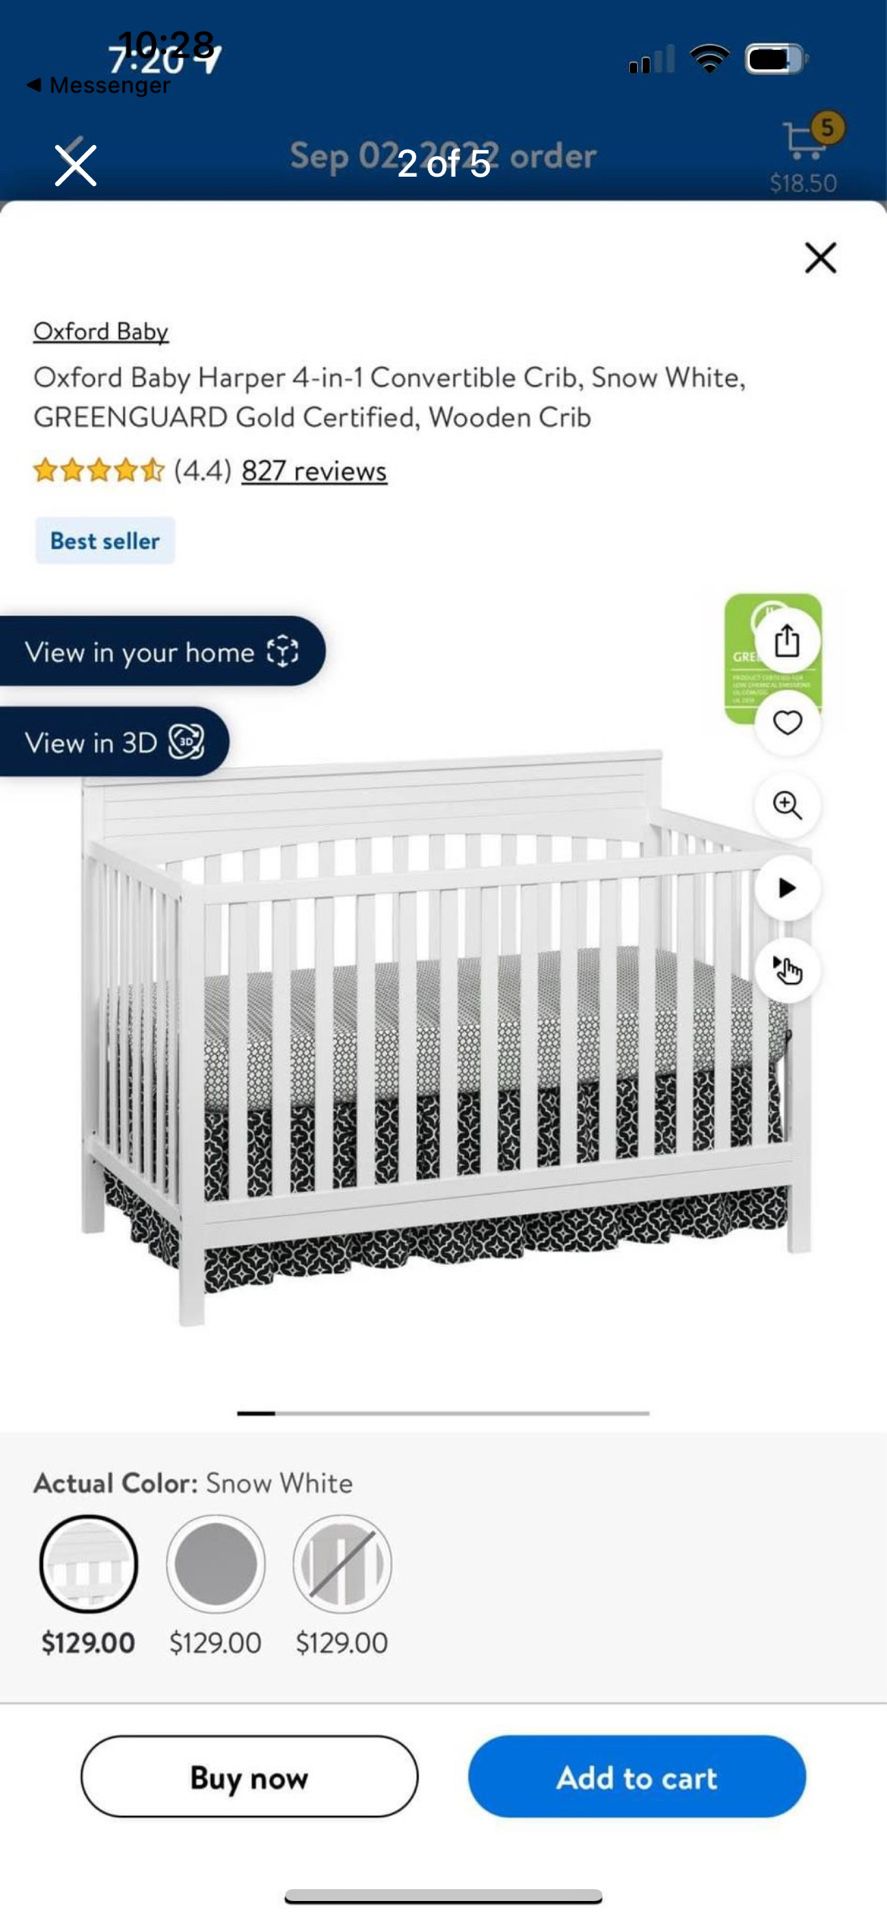 Brand new 4 in 1 crib and infant safe mattress